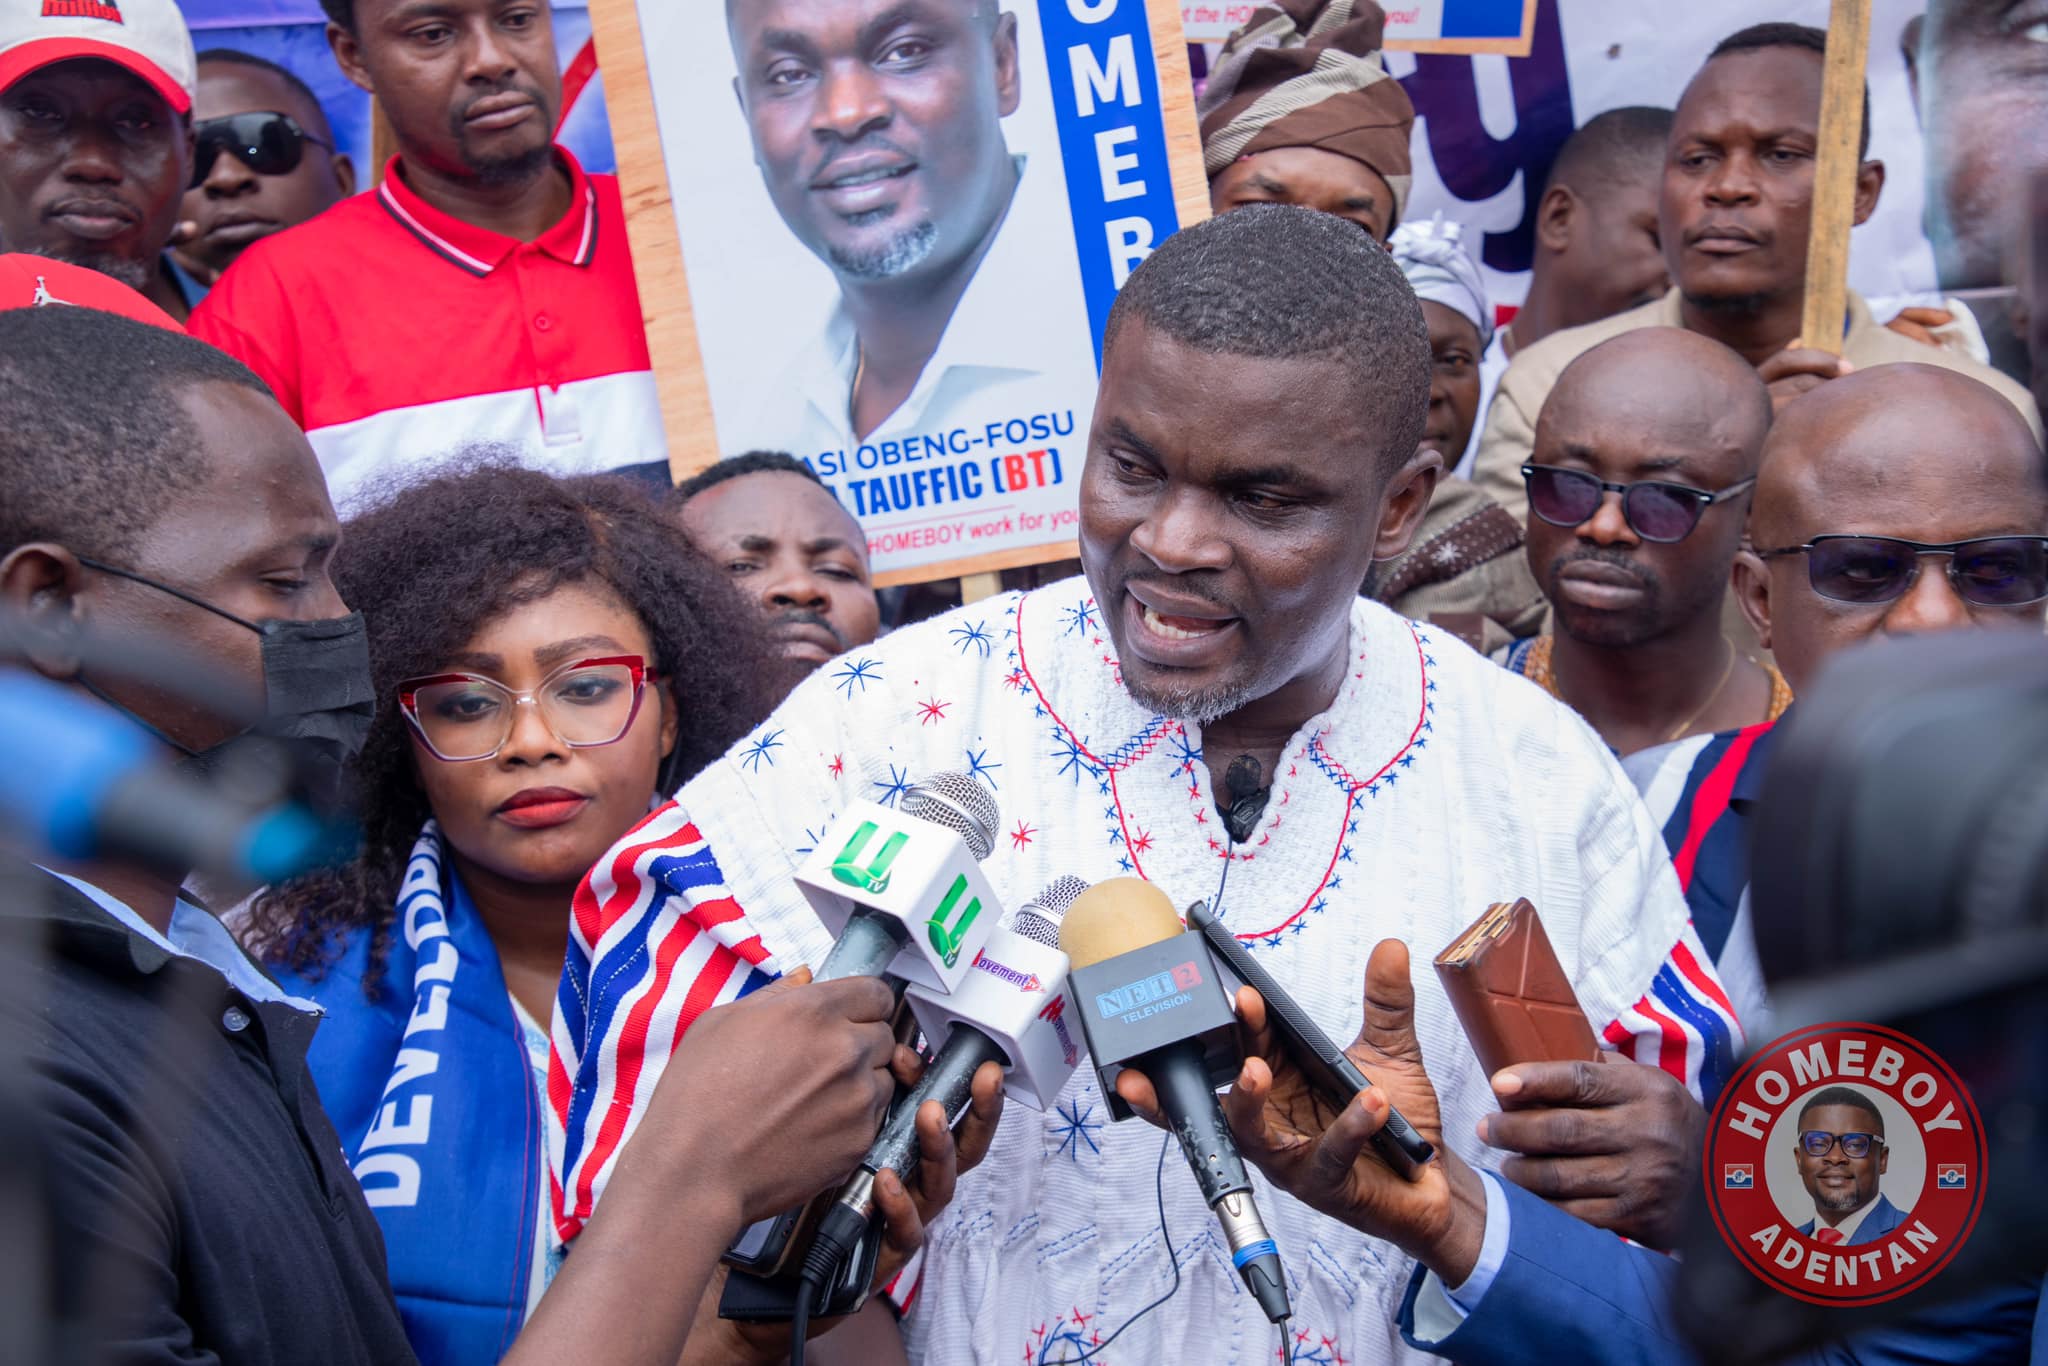 Kwasi Obeng-Fosu has launched a welfare scheme for the Adentan branch of the governing NPP.